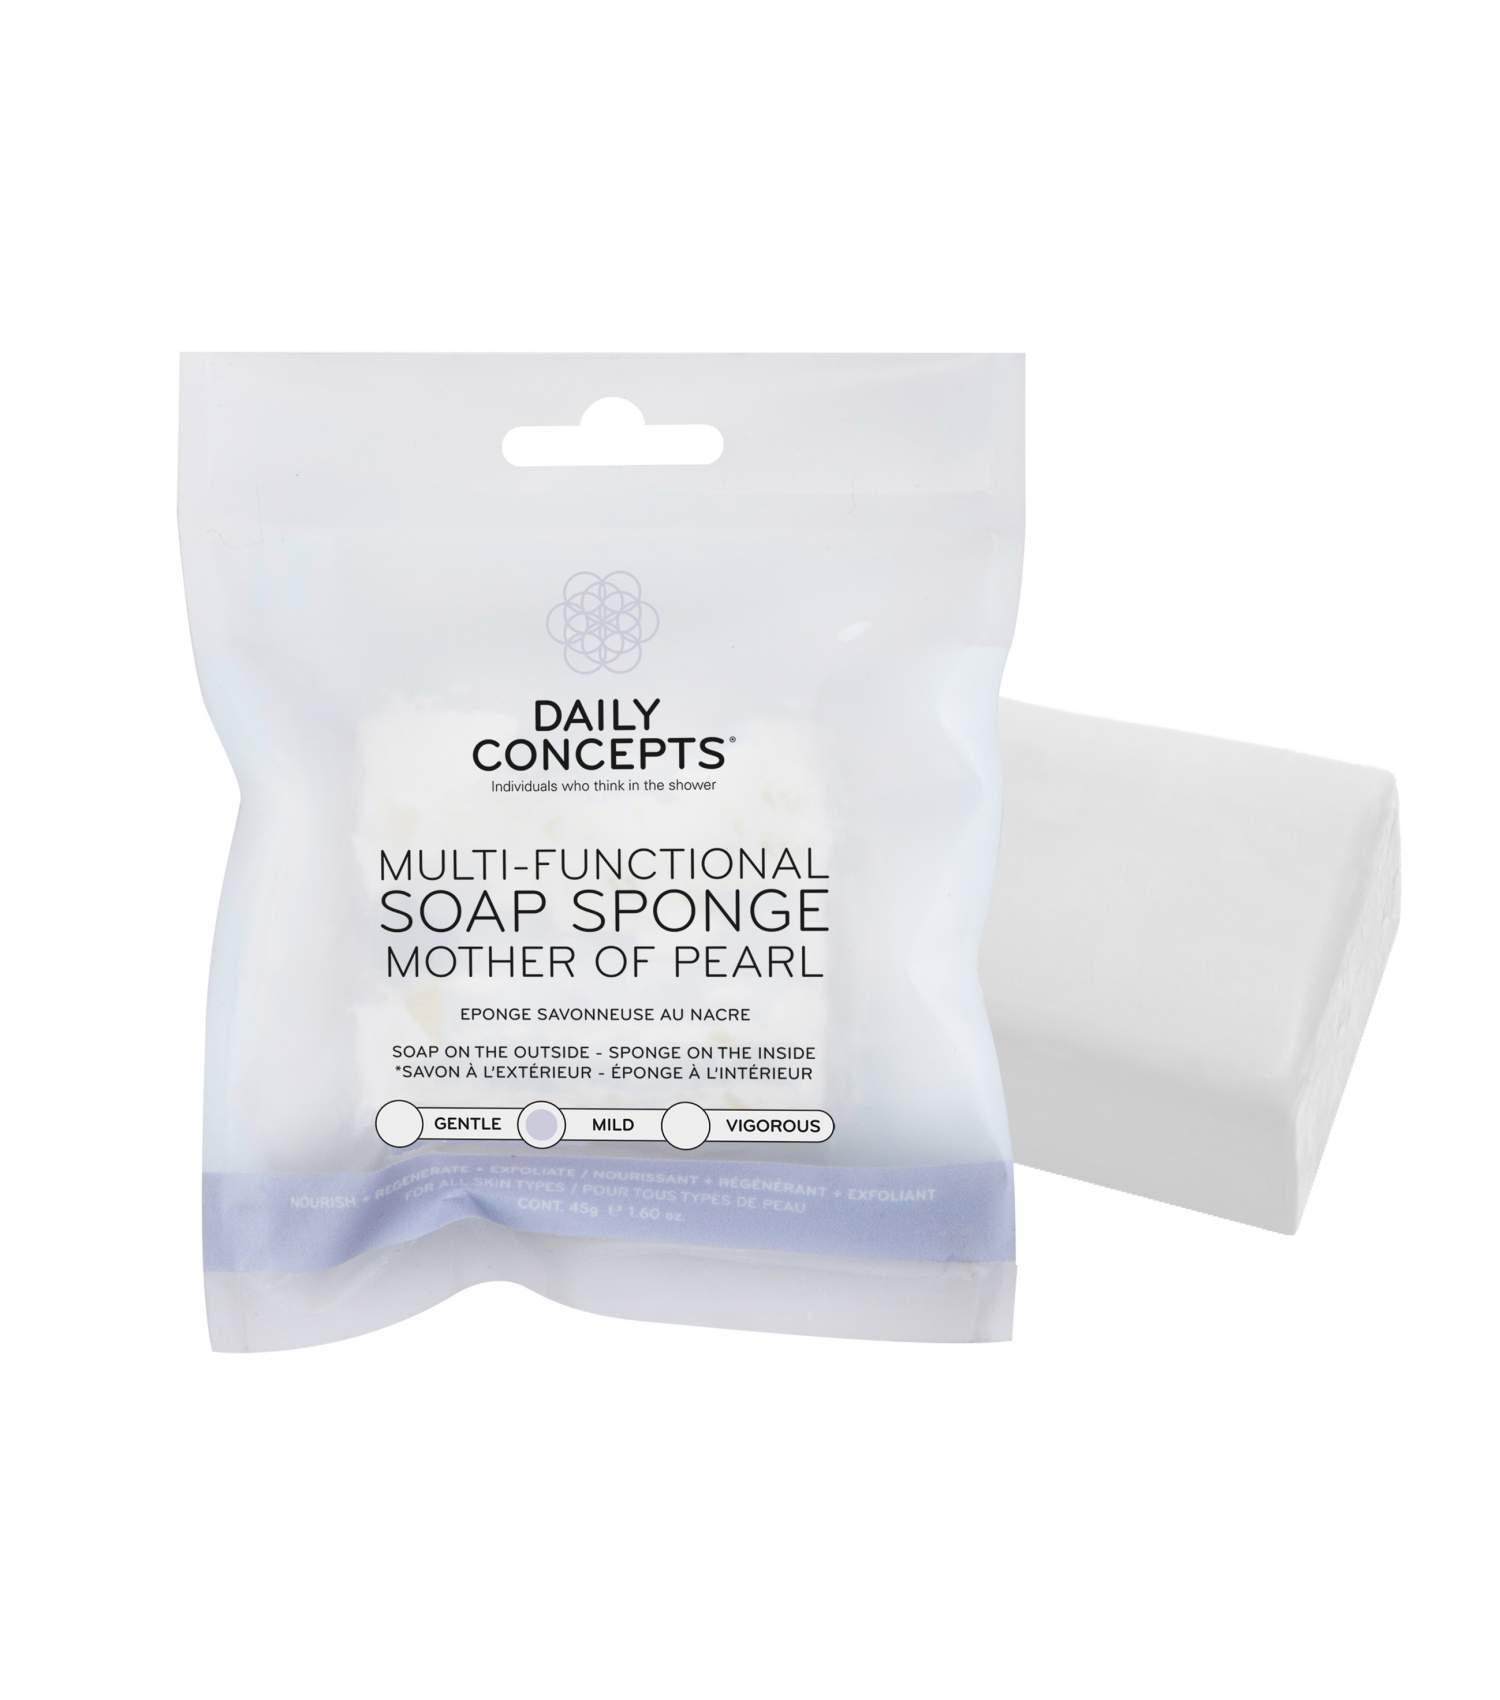 Daily Concepts Mother of Pearl Soap Sponge